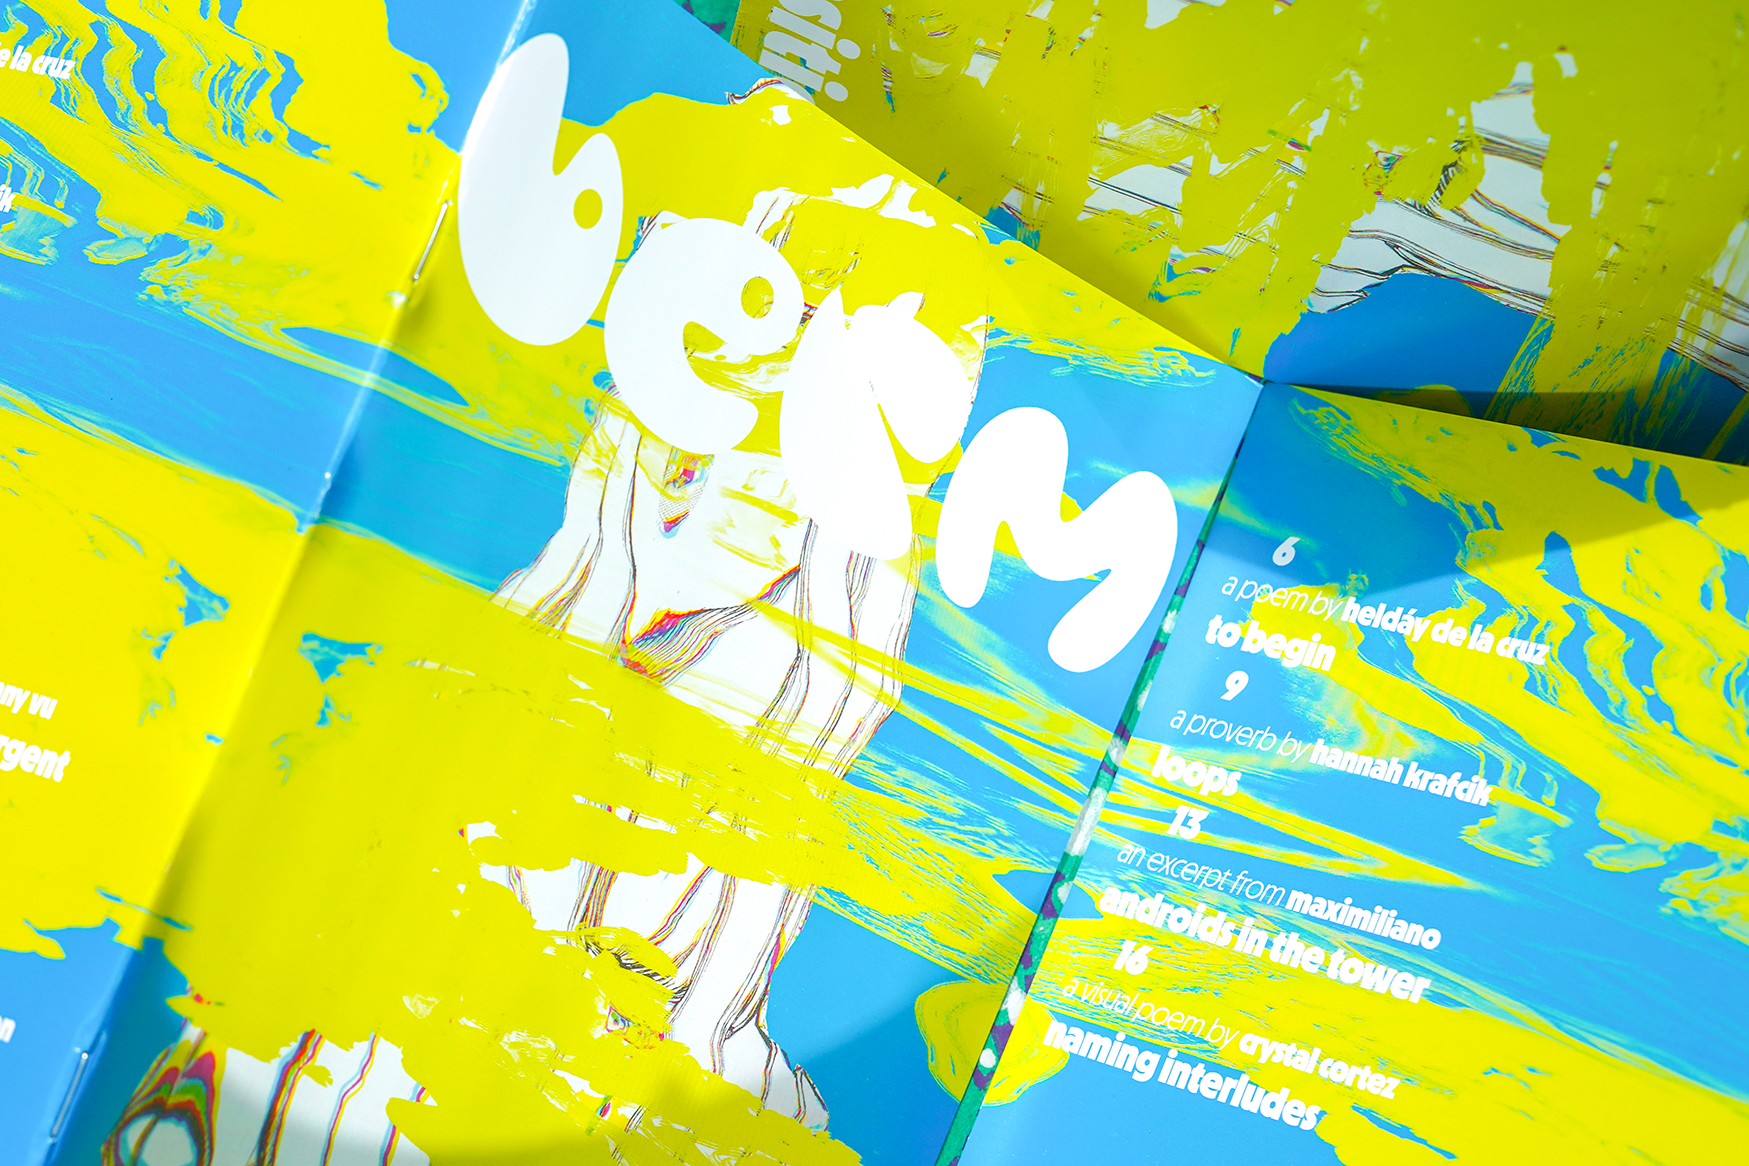 Several copies of Berm issue one, open showing both covers. The spine pushes up slightly.